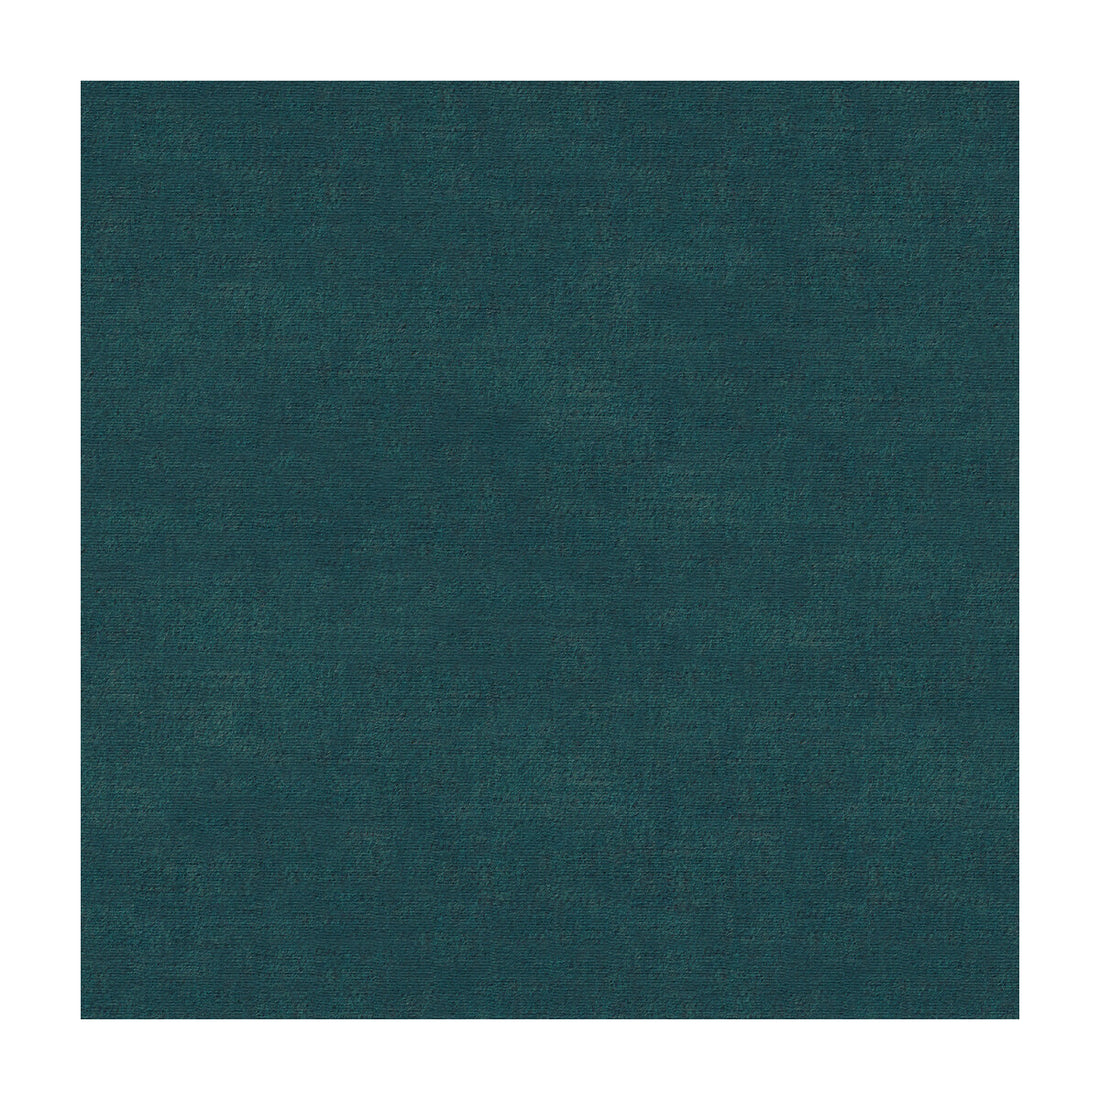 Montage fabric in teal color - pattern GWF-3526.35.0 - by Lee Jofa Modern in the Kelly Wearstler III collection